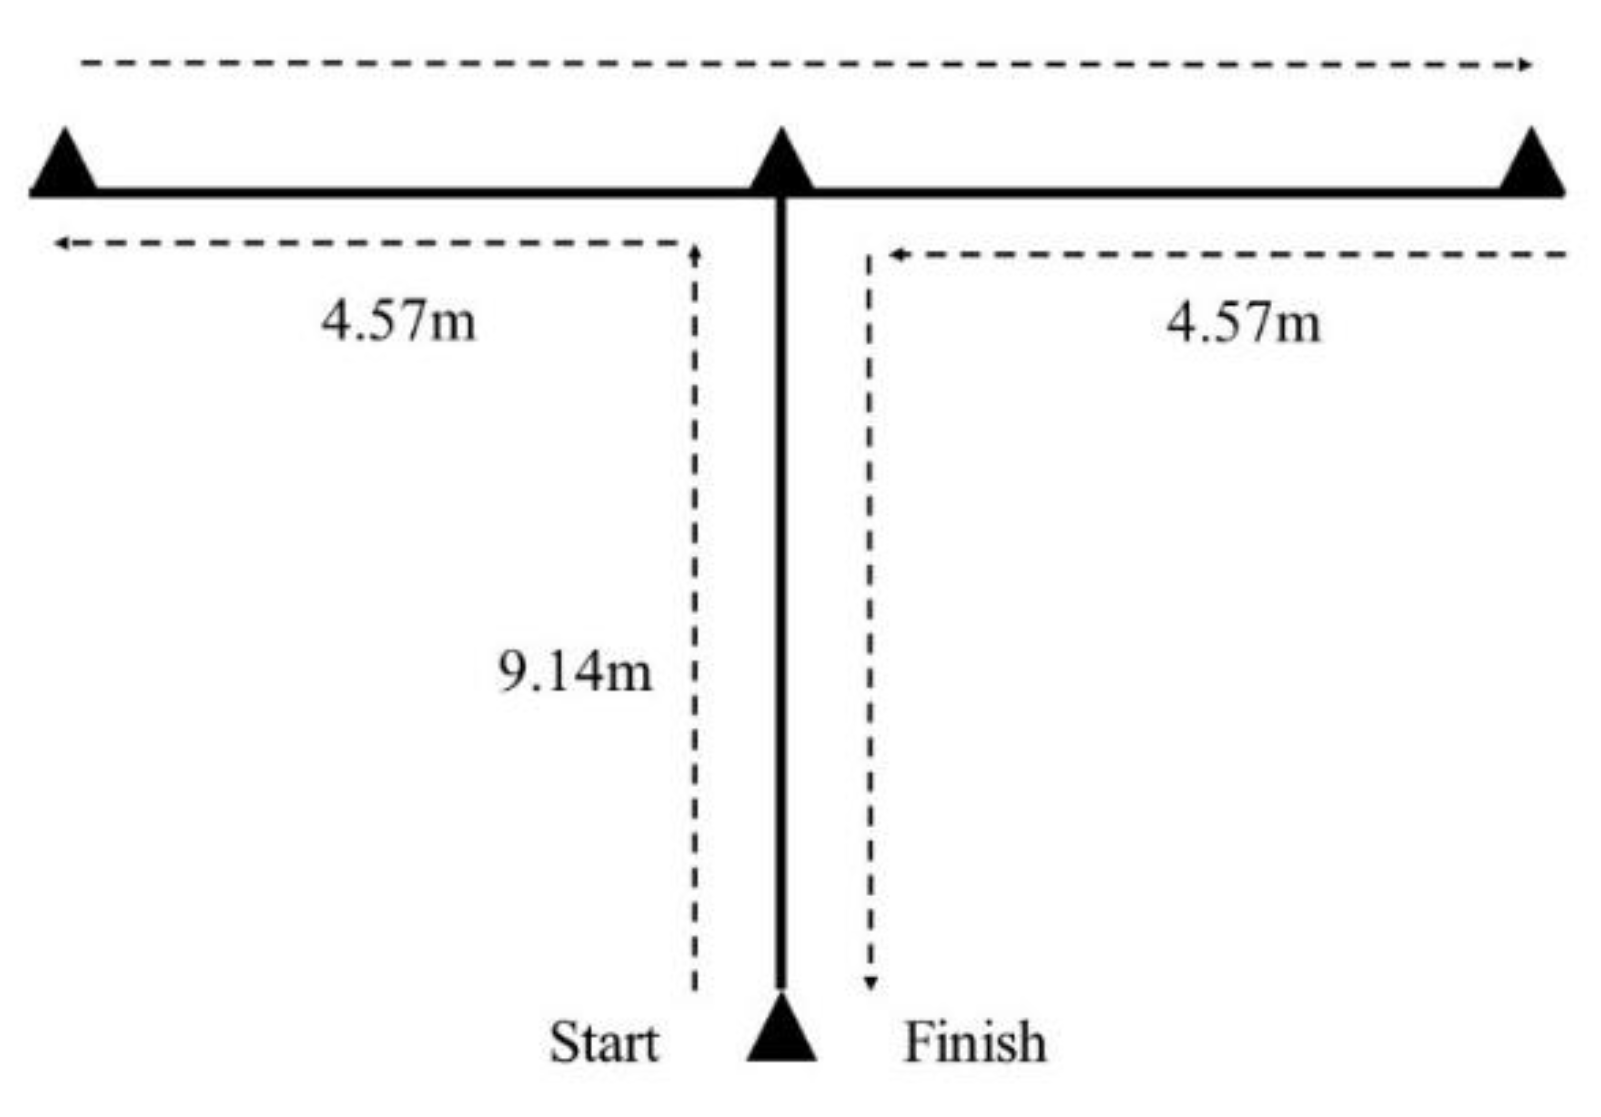 PDF) Reliability of a Reactive Agility Test for Youth Volleyball Players